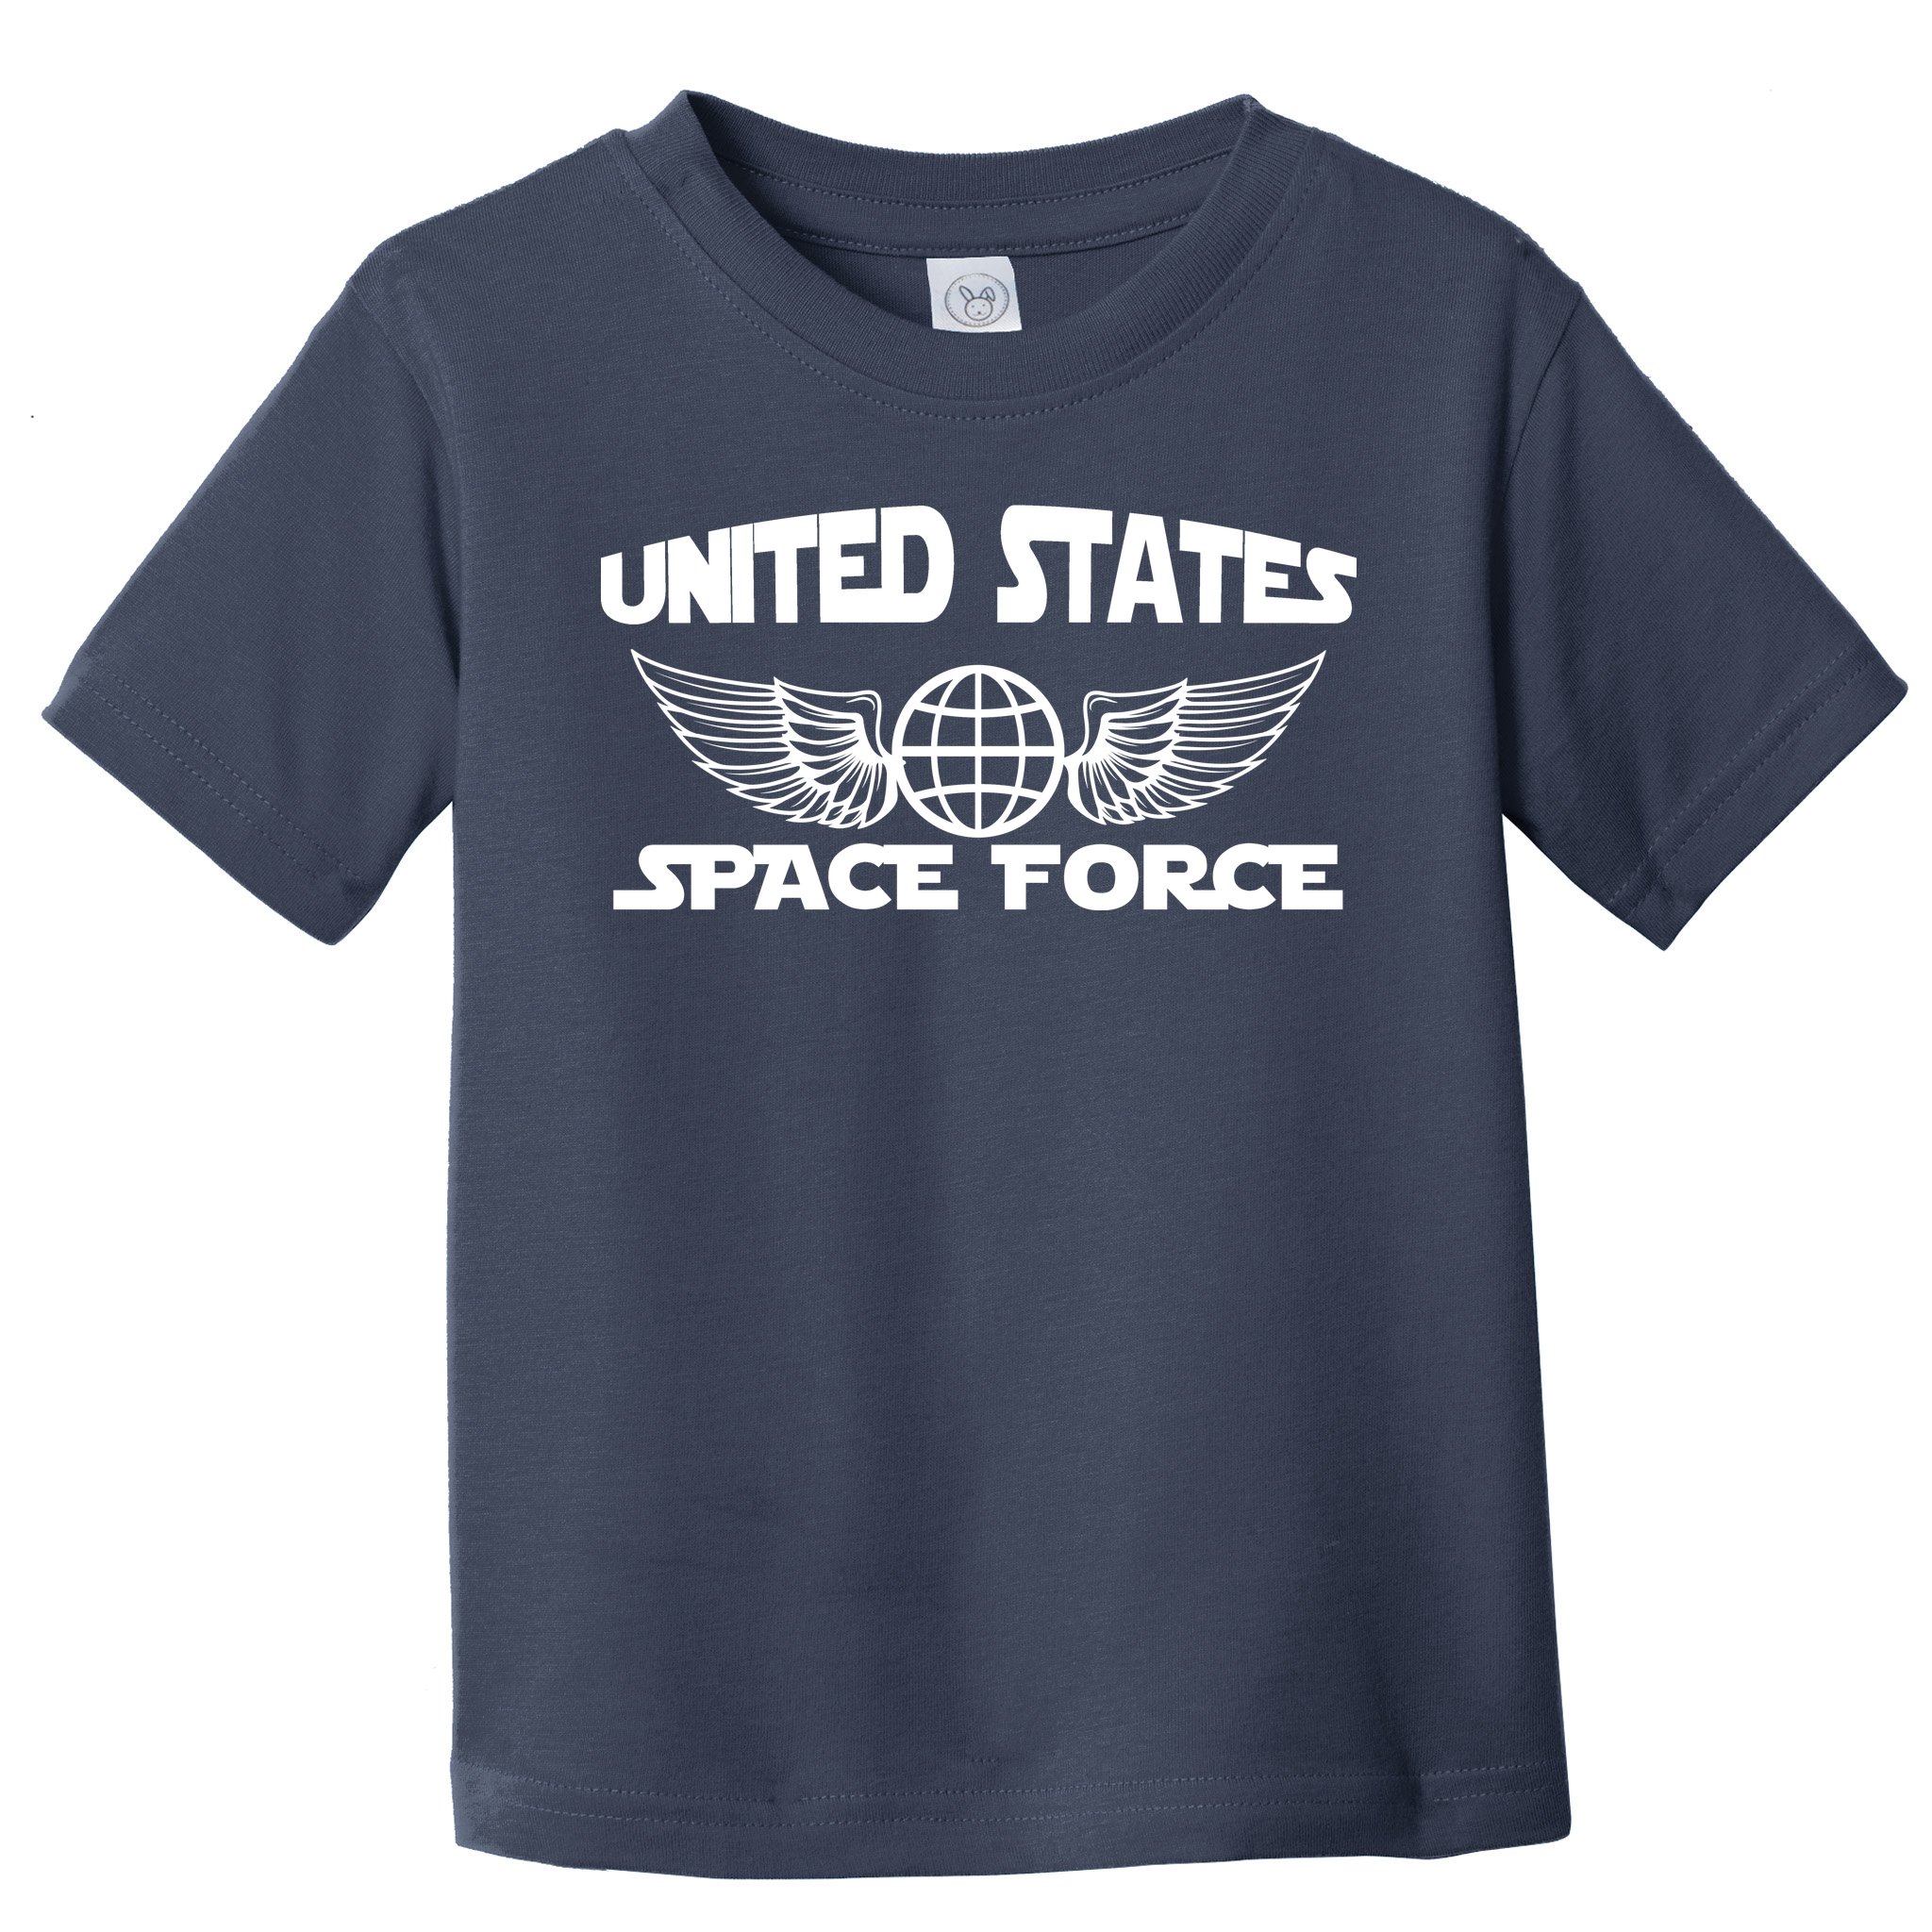 USA SPACE FORCE SHUTTLE USSF tee top Youth T-Shirt 